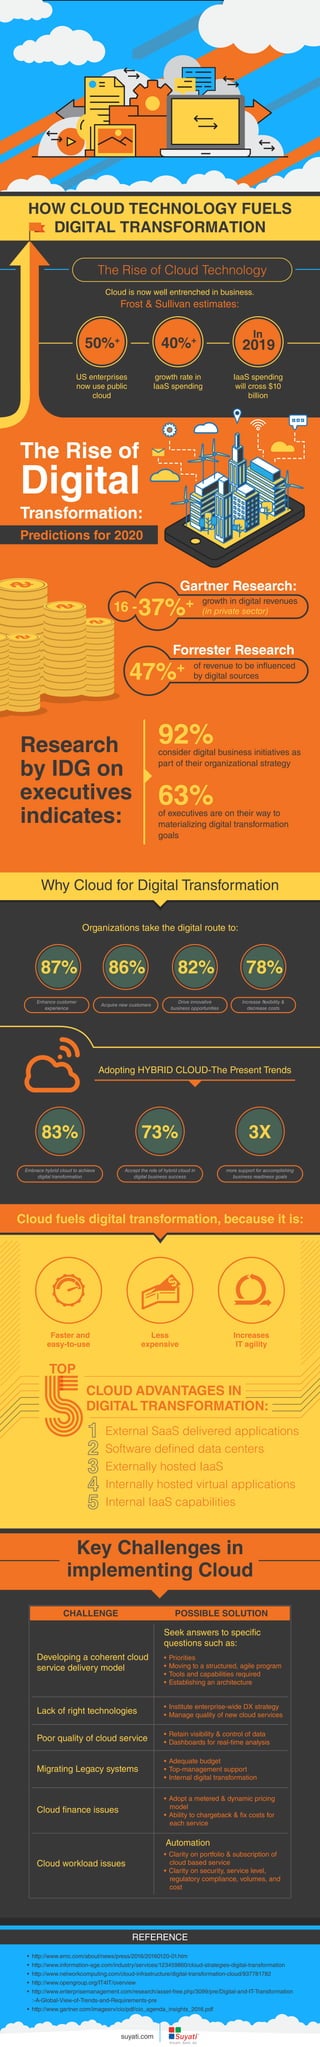 Key Challenges in
implementing Cloud
HOW CLOUD TECHNOLOGY FUELS
DIGITAL TRANSFORMATION
The Rise of Cloud Technology
Cloud is now well entrenched in business.
Frost & Sullivan estimates:
50%+
US enterprises
now use public
cloud
40%+
growth rate in
IaaS spending
2019
In
IaaS spending
will cross $10
billion
The Rise of
Digital
Transformation:
Predictions for 2020
Gartner Research:
16 -
growth in digital revenues
(in private sector)37%+
Forrester Research
of revenue to be influenced
by digital sources47%+
Research
by IDG on
executives
indicates:
92%consider digital business initiatives as
part of their organizational strategy
63%of executives are on their way to
materializing digital transformation
goals
Why Cloud for Digital Transformation
Cloud fuels digital transformation, because it is:
Organizations take the digital route to:
87%
Enhance customer
experience
86%
Acquire new customers
82%
Drive innovative
business opportunities
78%
Increase flexibility &
decrease costs
Adopting HYBRID CLOUD-The Present Trends
83%
Embrace hybrid cloud to achieve
digital transformation
73%
Accept the role of hybrid cloud in
digital business success
3X
more support for accomplishing
business readiness goals
Faster and
easy-to-use
Less
expensive
Increases
IT agility
$
CLOUD ADVANTAGES IN
DIGITAL TRANSFORMATION:
External SaaS delivered applications
Software deﬁned data centers
Externally hosted IaaS
Internally hosted virtual applications
Internal IaaS capabilities
TOP
Developing a coherent cloud
service delivery model
Lack of right technologies
Poor quality of cloud service
Migrating Legacy systems
Seek answers to specific
questions such as:
Automation
• Priorities
• Moving to a structured, agile program
• Tools and capabilities required
• Establishing an architecture
• Institute enterprise-wide DX strategy
• Manage quality of new cloud services
• Retain visibility & control of data
• Dashboards for real-time analysis
• Adequate budget
• Top-management support
• Internal digital transformation
Cloud finance issues
• Adopt a metered & dynamic pricing
model
• Ability to chargeback & fix costs for
each service
Cloud workload issues
• Clarity on portfolio & subscription of
cloud based service
• Clarity on security, service level,
regulatory compliance, volumes, and
cost
CHALLENGE POSSIBLE SOLUTION
REFERENCE
• http://www.emc.com/about/news/press/2016/20160120-01.htm
• http://www.information-age.com/industry/services/123459860/cloud-strategies-digital-transformation
• http://www.networkcomputing.com/cloud-infrastructure/digital-transformation-cloud/937781782
• http://www.opengroup.org/IT4IT/overview
• http://www.enterprisemanagement.com/research/asset-free.php/3099/pre/Digital-and-IT-Transformation
:-A-Global-View-of-Trends-and-Requirements-pre
• http://www.gartner.com/imagesrv/cio/pdf/cio_agenda_insights_2016.pdf
suyati.com
 